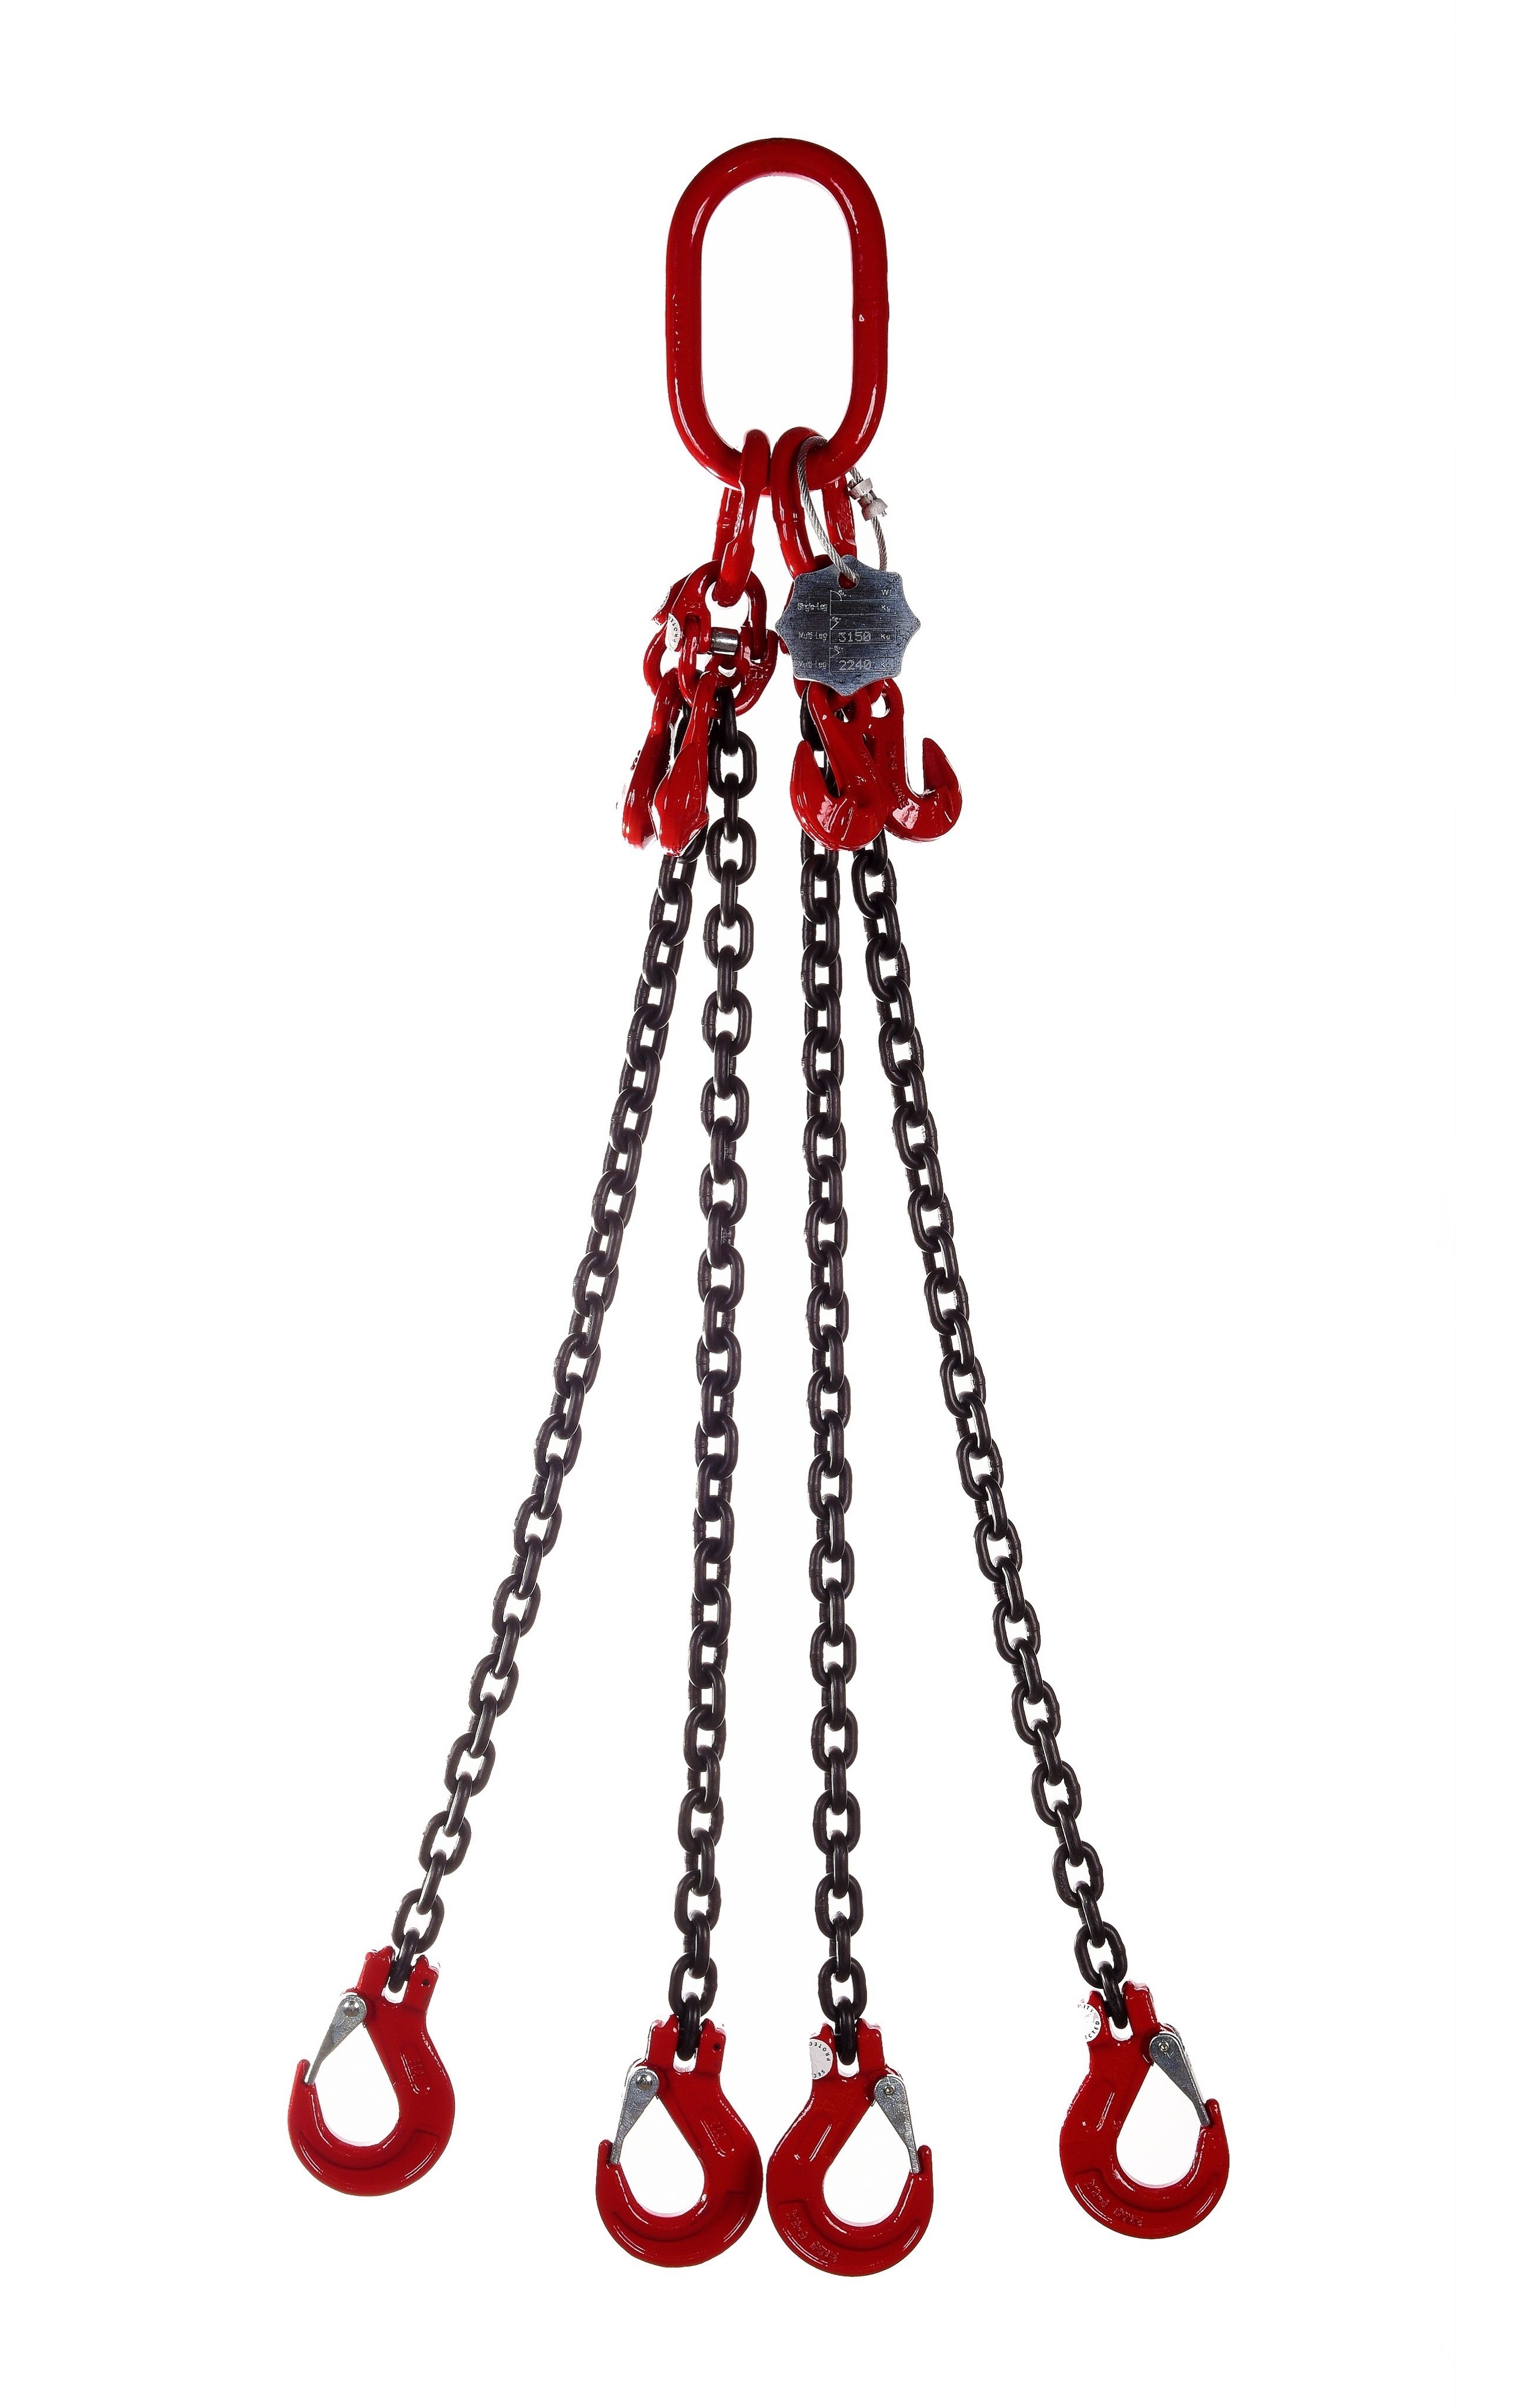 4 Leg 23.6tonne 19mm Lifting Chain Sling with choice of length and hooks – With Shortening Hook – 9mtr – Clevis Sling Hook – Chain Slings – WSB